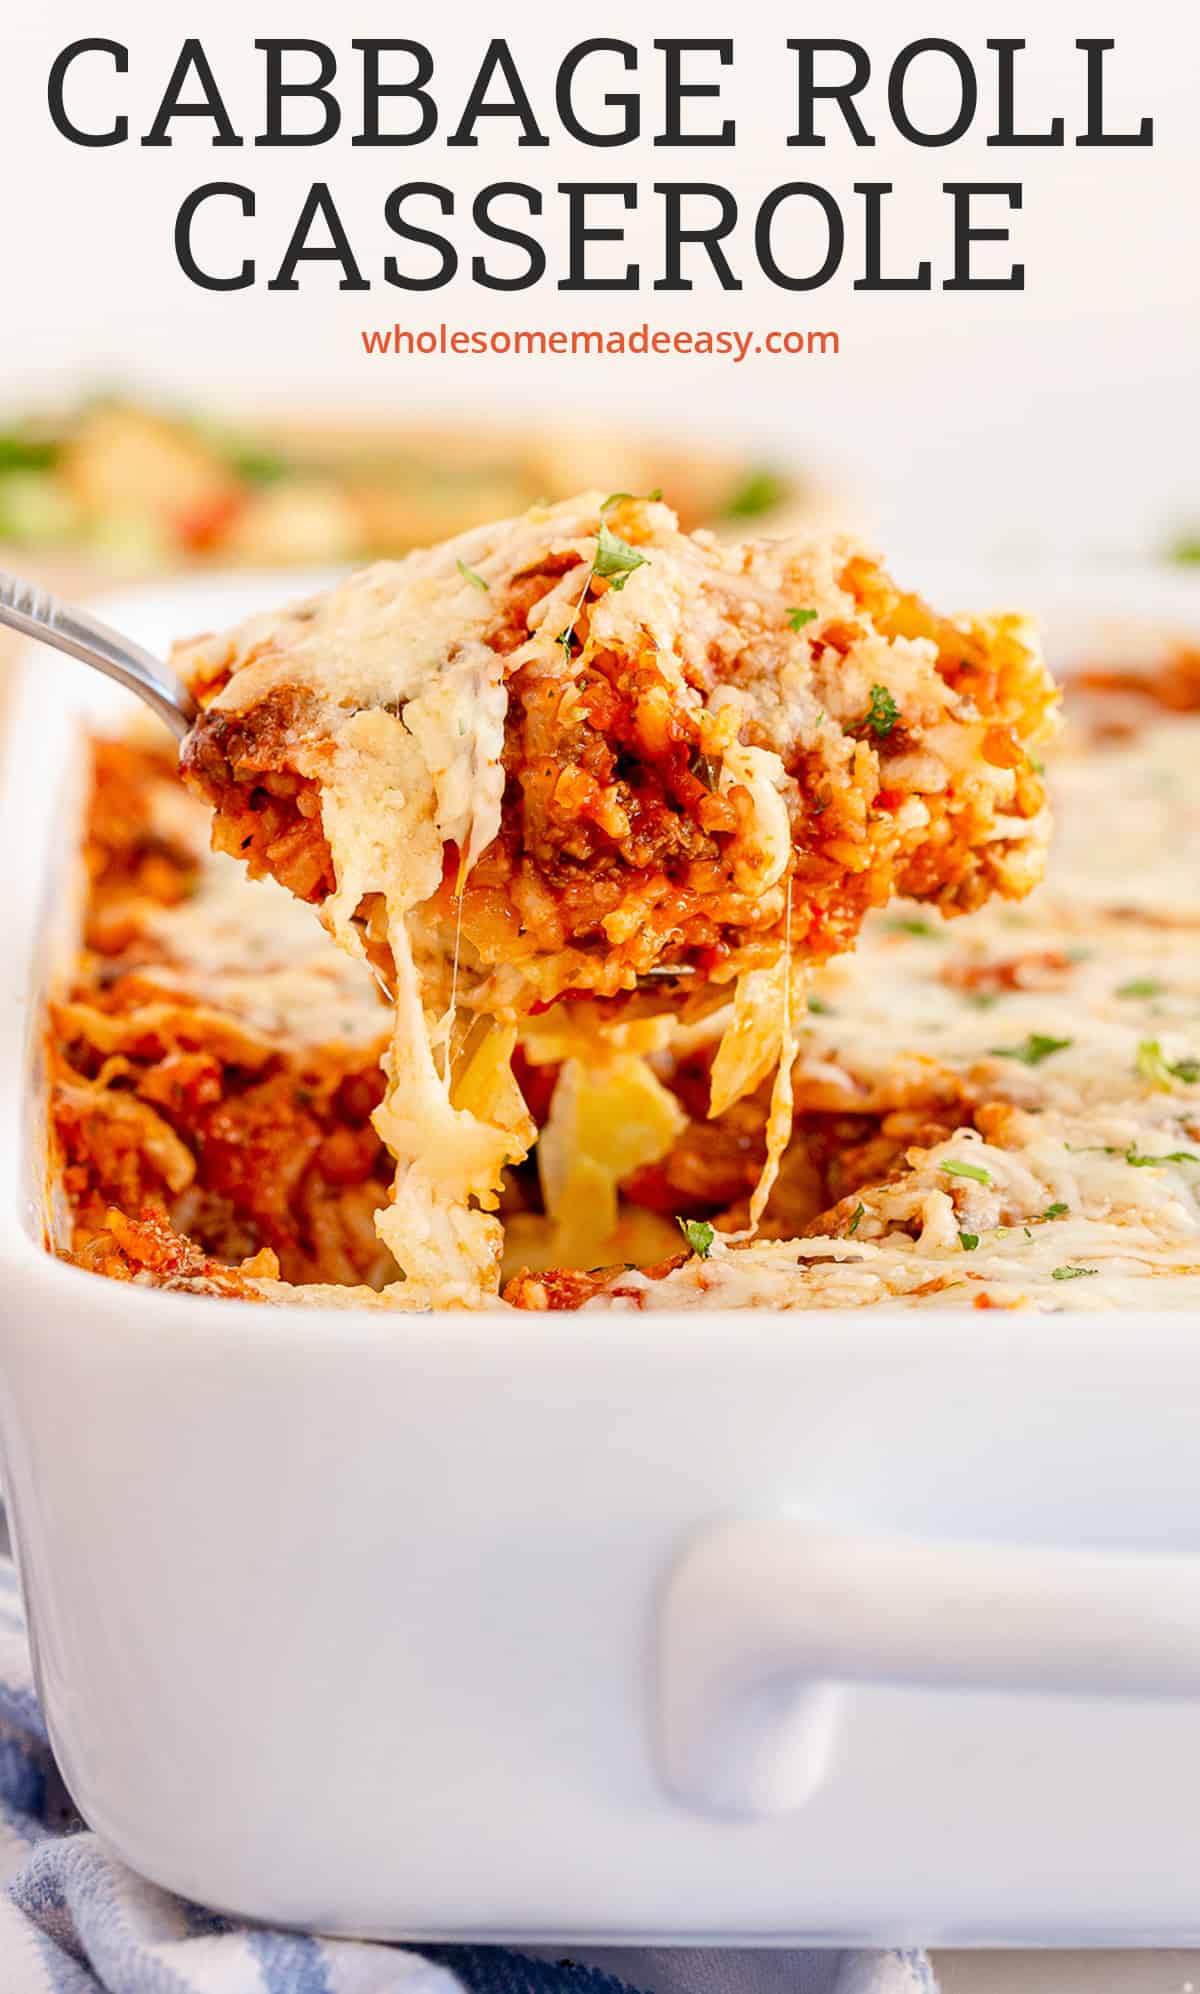 A spoon scoops up Cabbage Roll Casserole from a baking dish with text overlay.